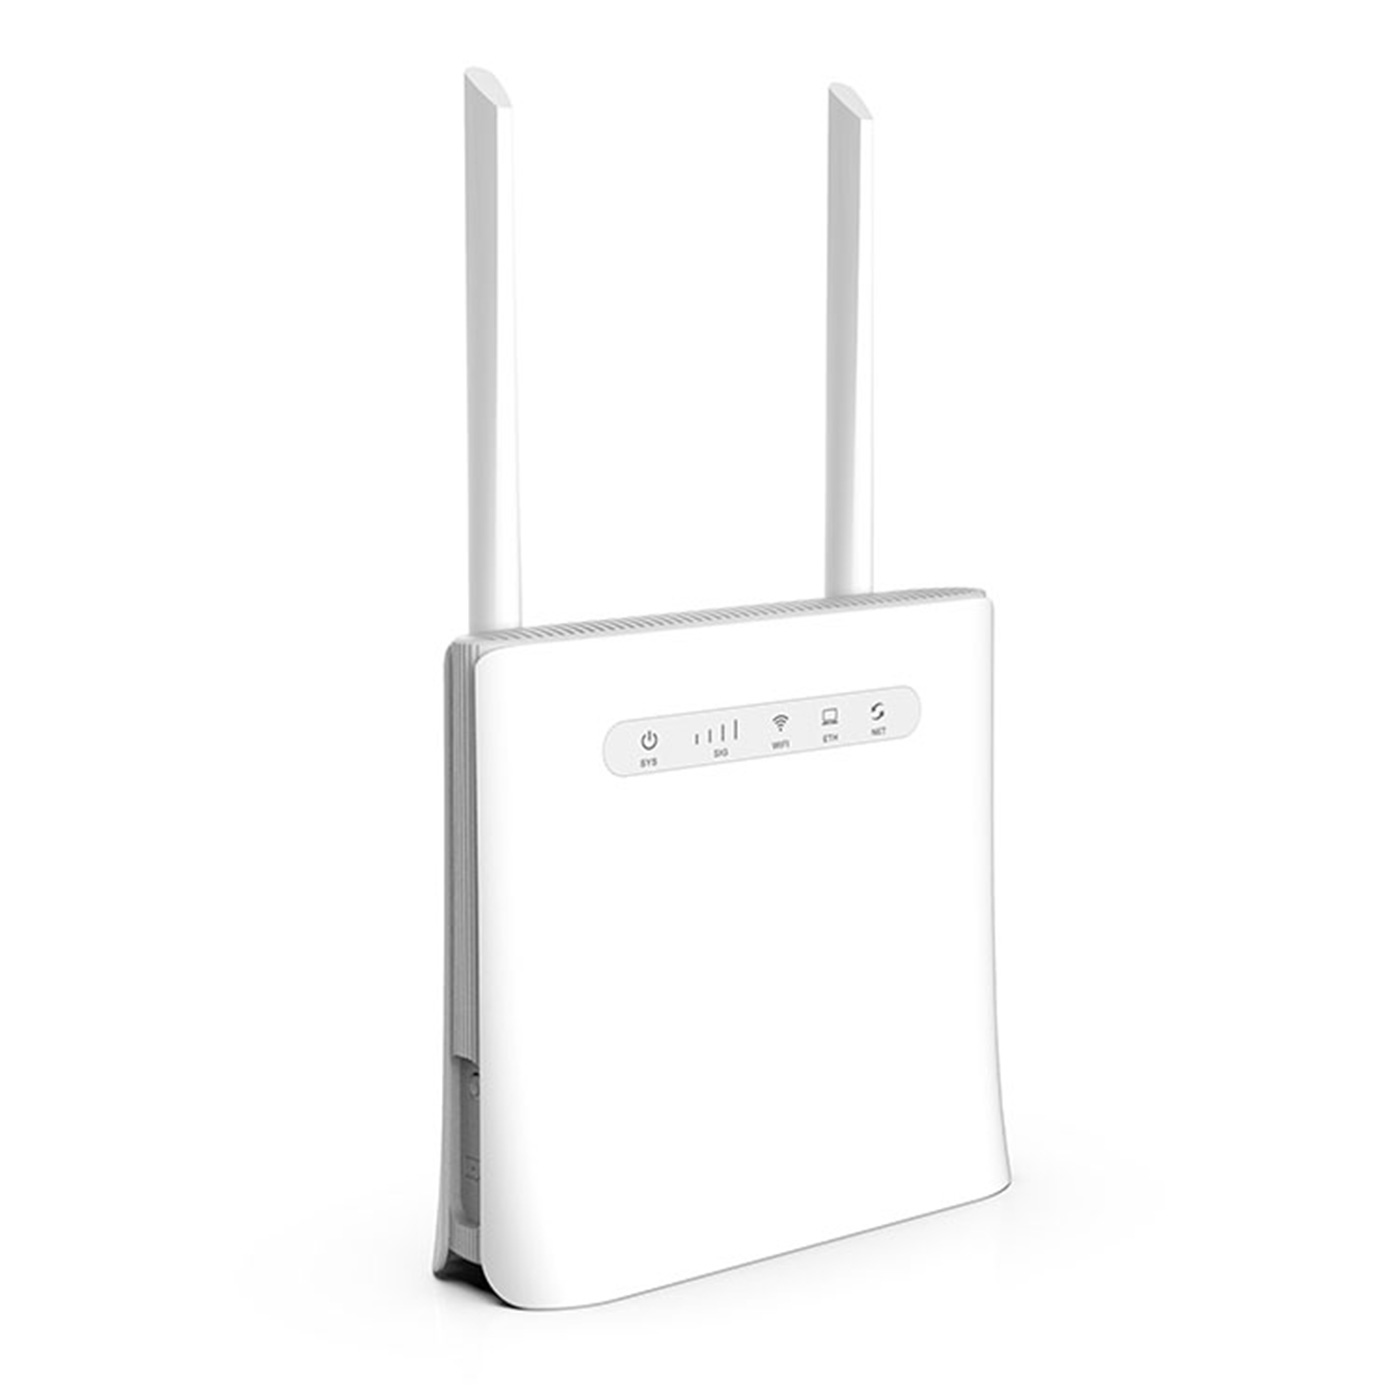 ROUTER DUAL WIRELESS BANDA B - 450Mbps  Centinel